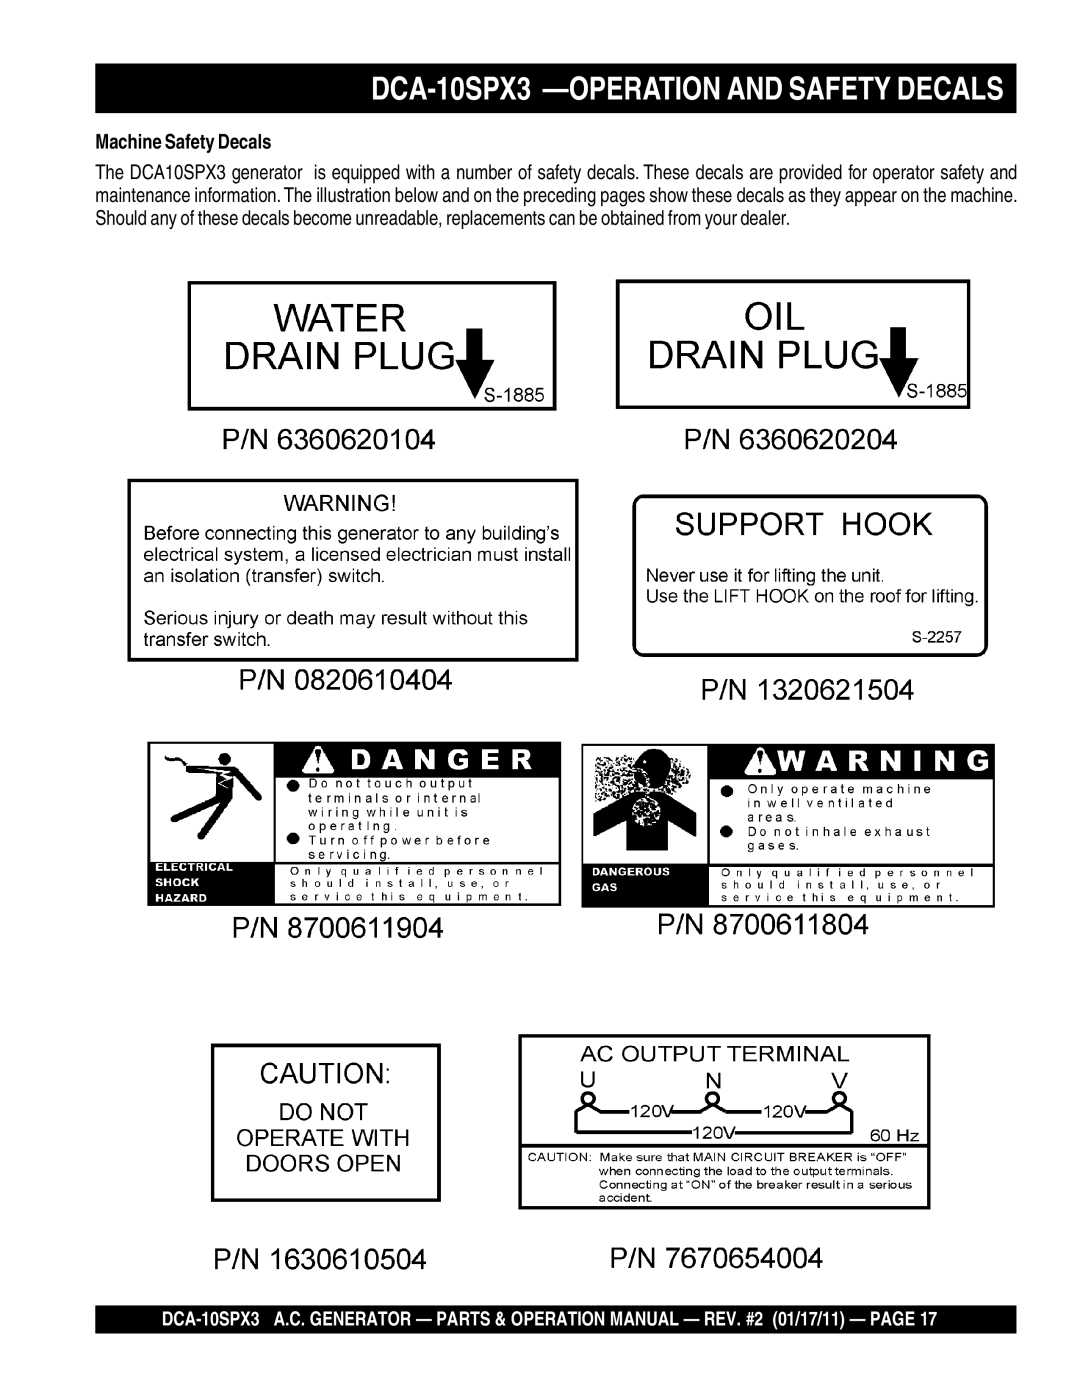 Multiquip DCA10SPX3 manual DCA-10SPX3 -OPERATION AND SAFETY DECALS, Machine Safety Decals 